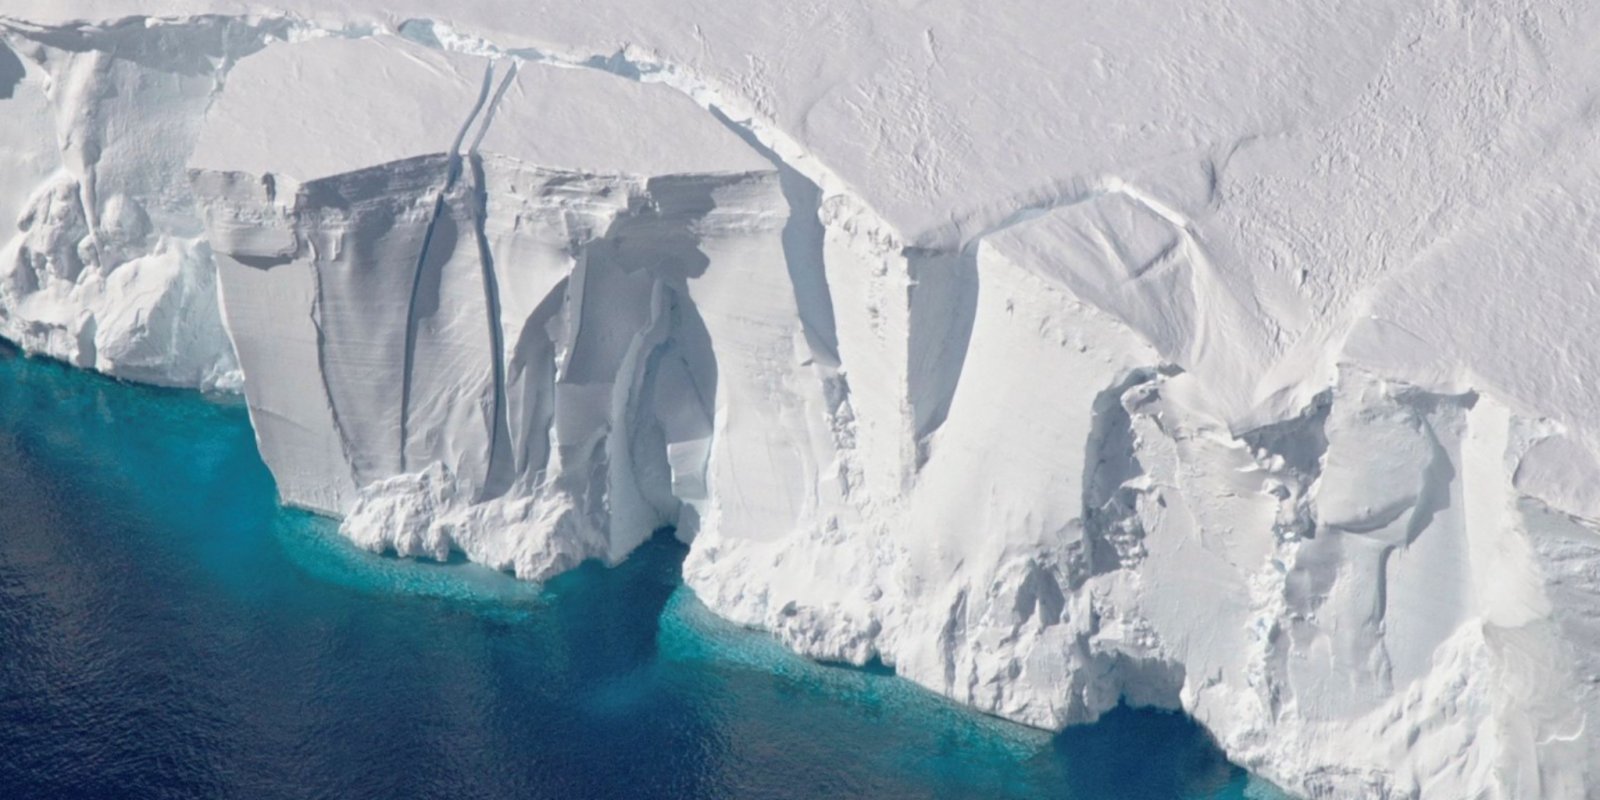 Melting of world's largest ice sheet could cause sea levels to rise by 5 meters by 2500: report